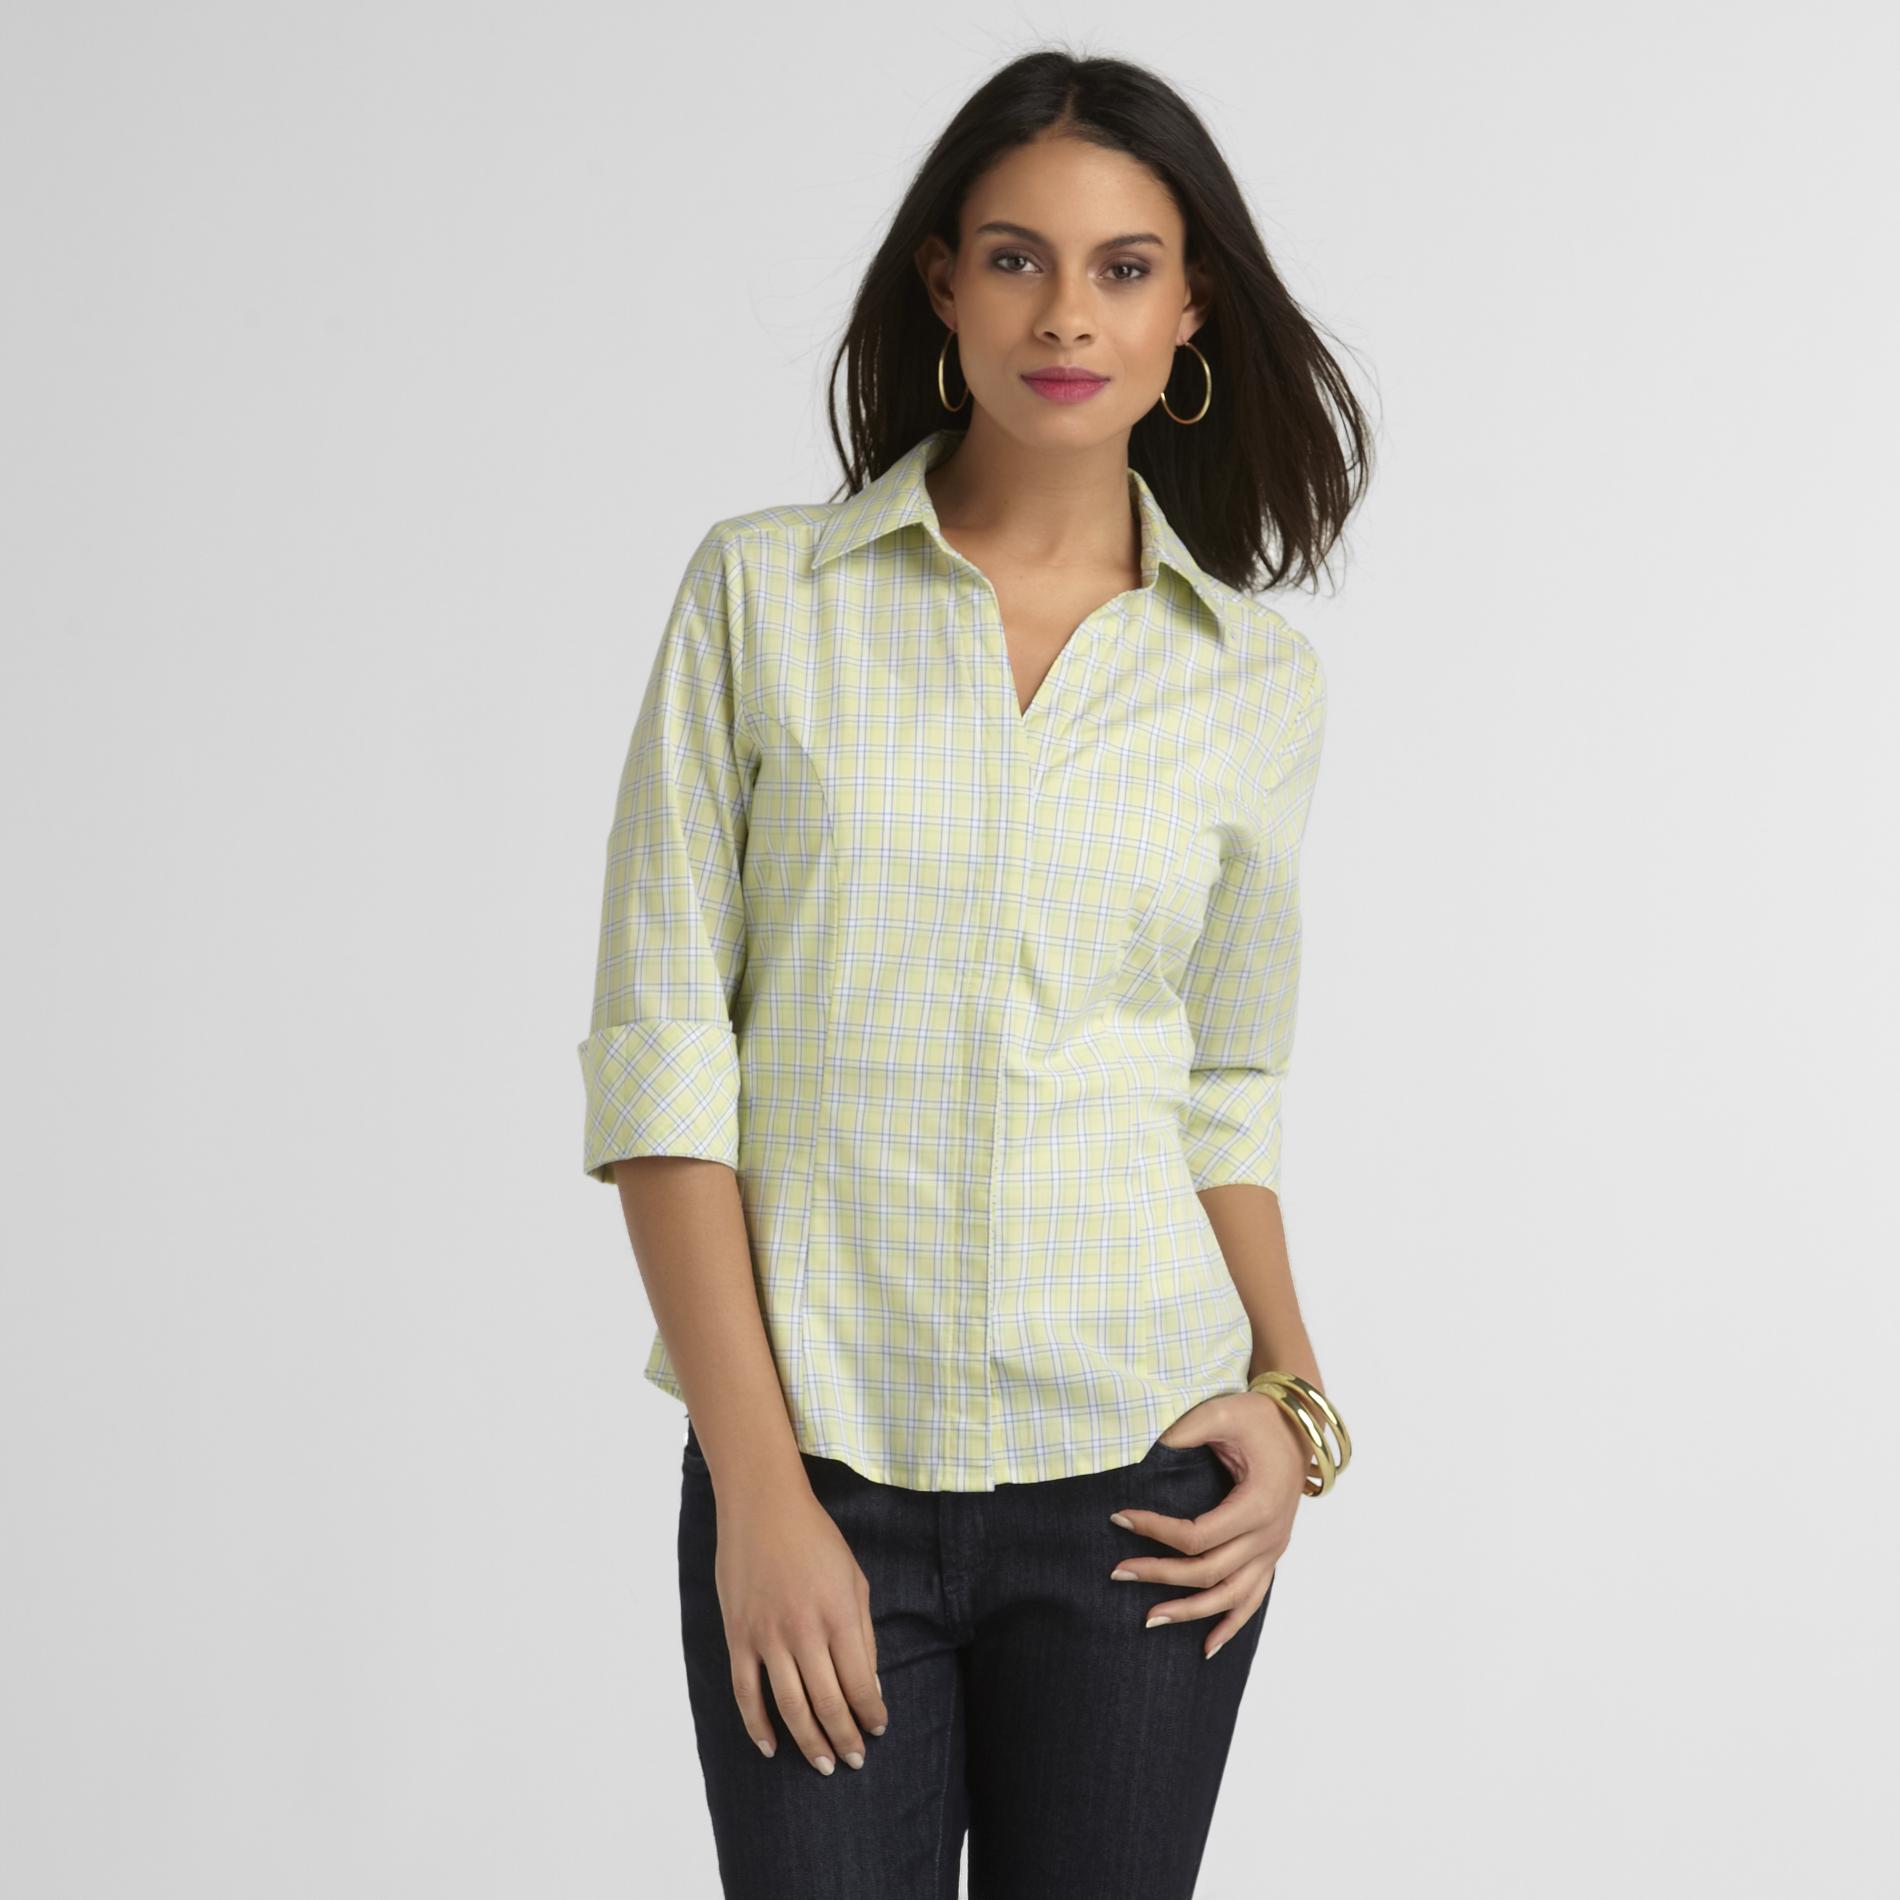 Riders by Lee Women's Easy Care Blouse - Plaid